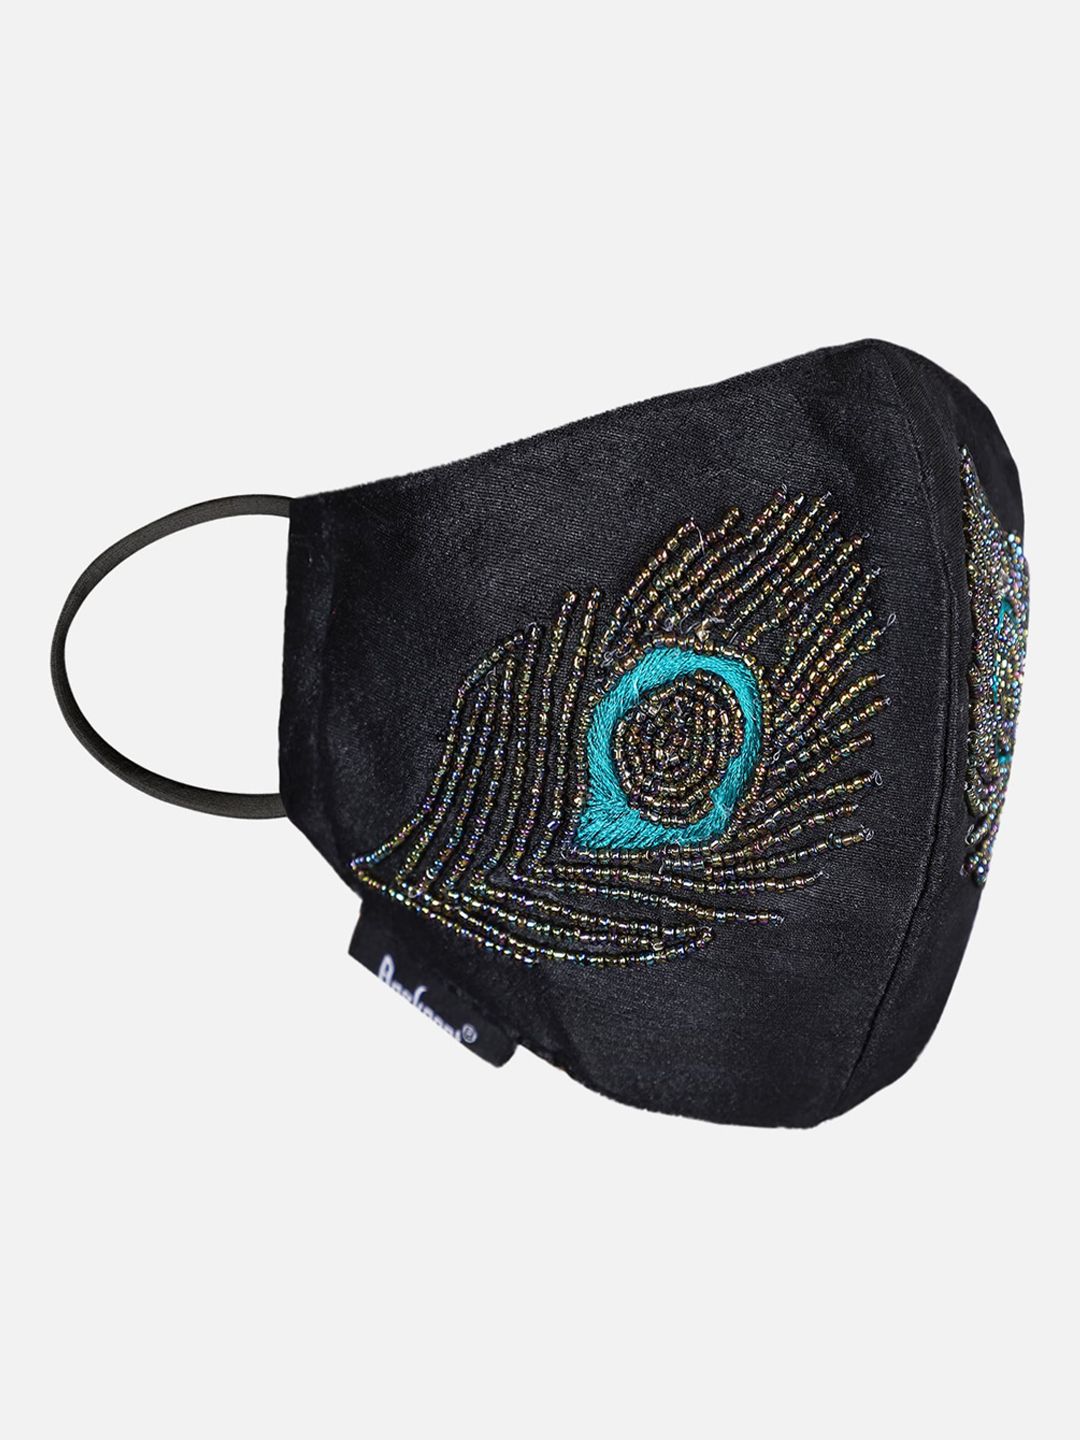 Anekaant Women Black & Blue Embellished 3-Ply Reusable Outdoor Face Masks Price in India